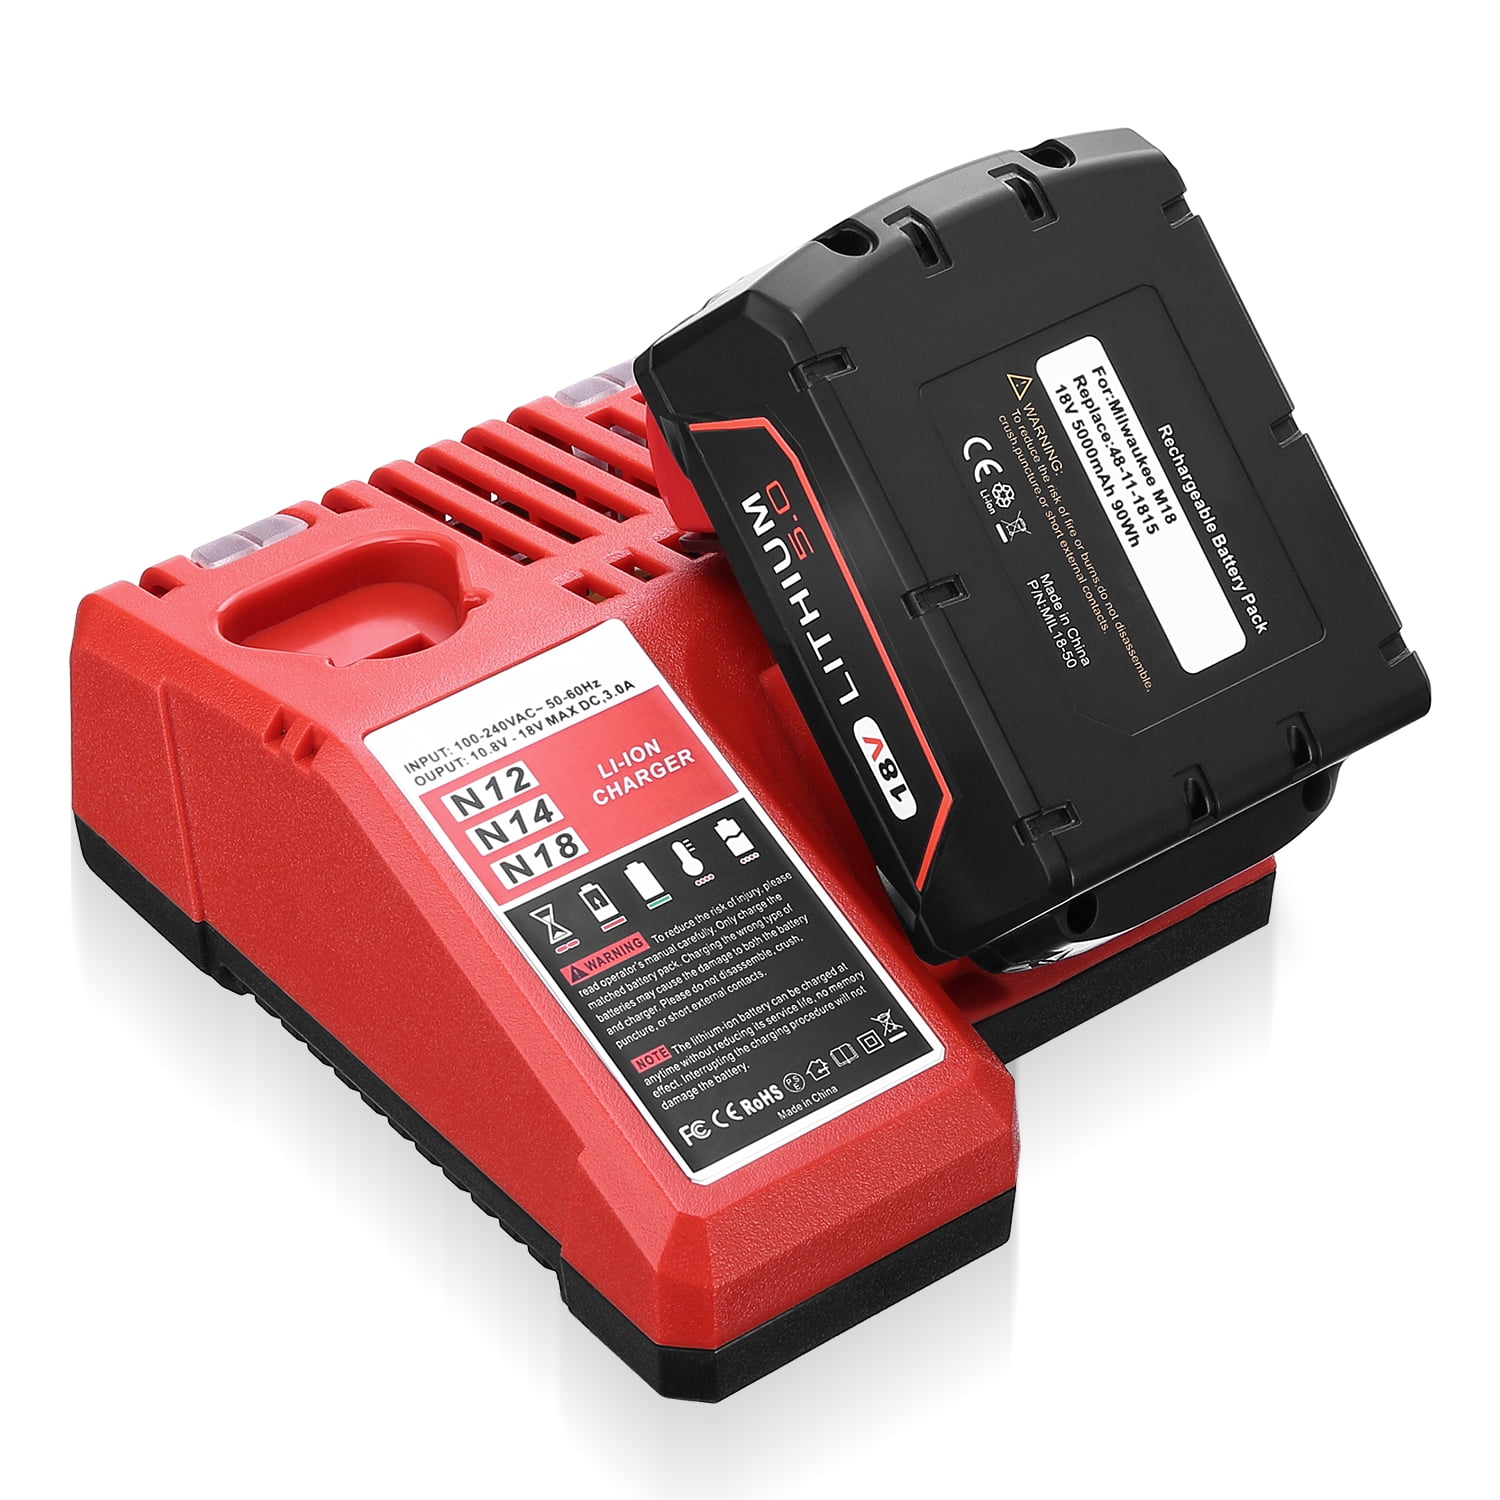 Lithium-ion Battery Charger Multi Voltage Charger Replacement for Milwaukee M18 14.4V-18V 48-11-1850 48-11-1840 48-11-1815 48-11-1828 